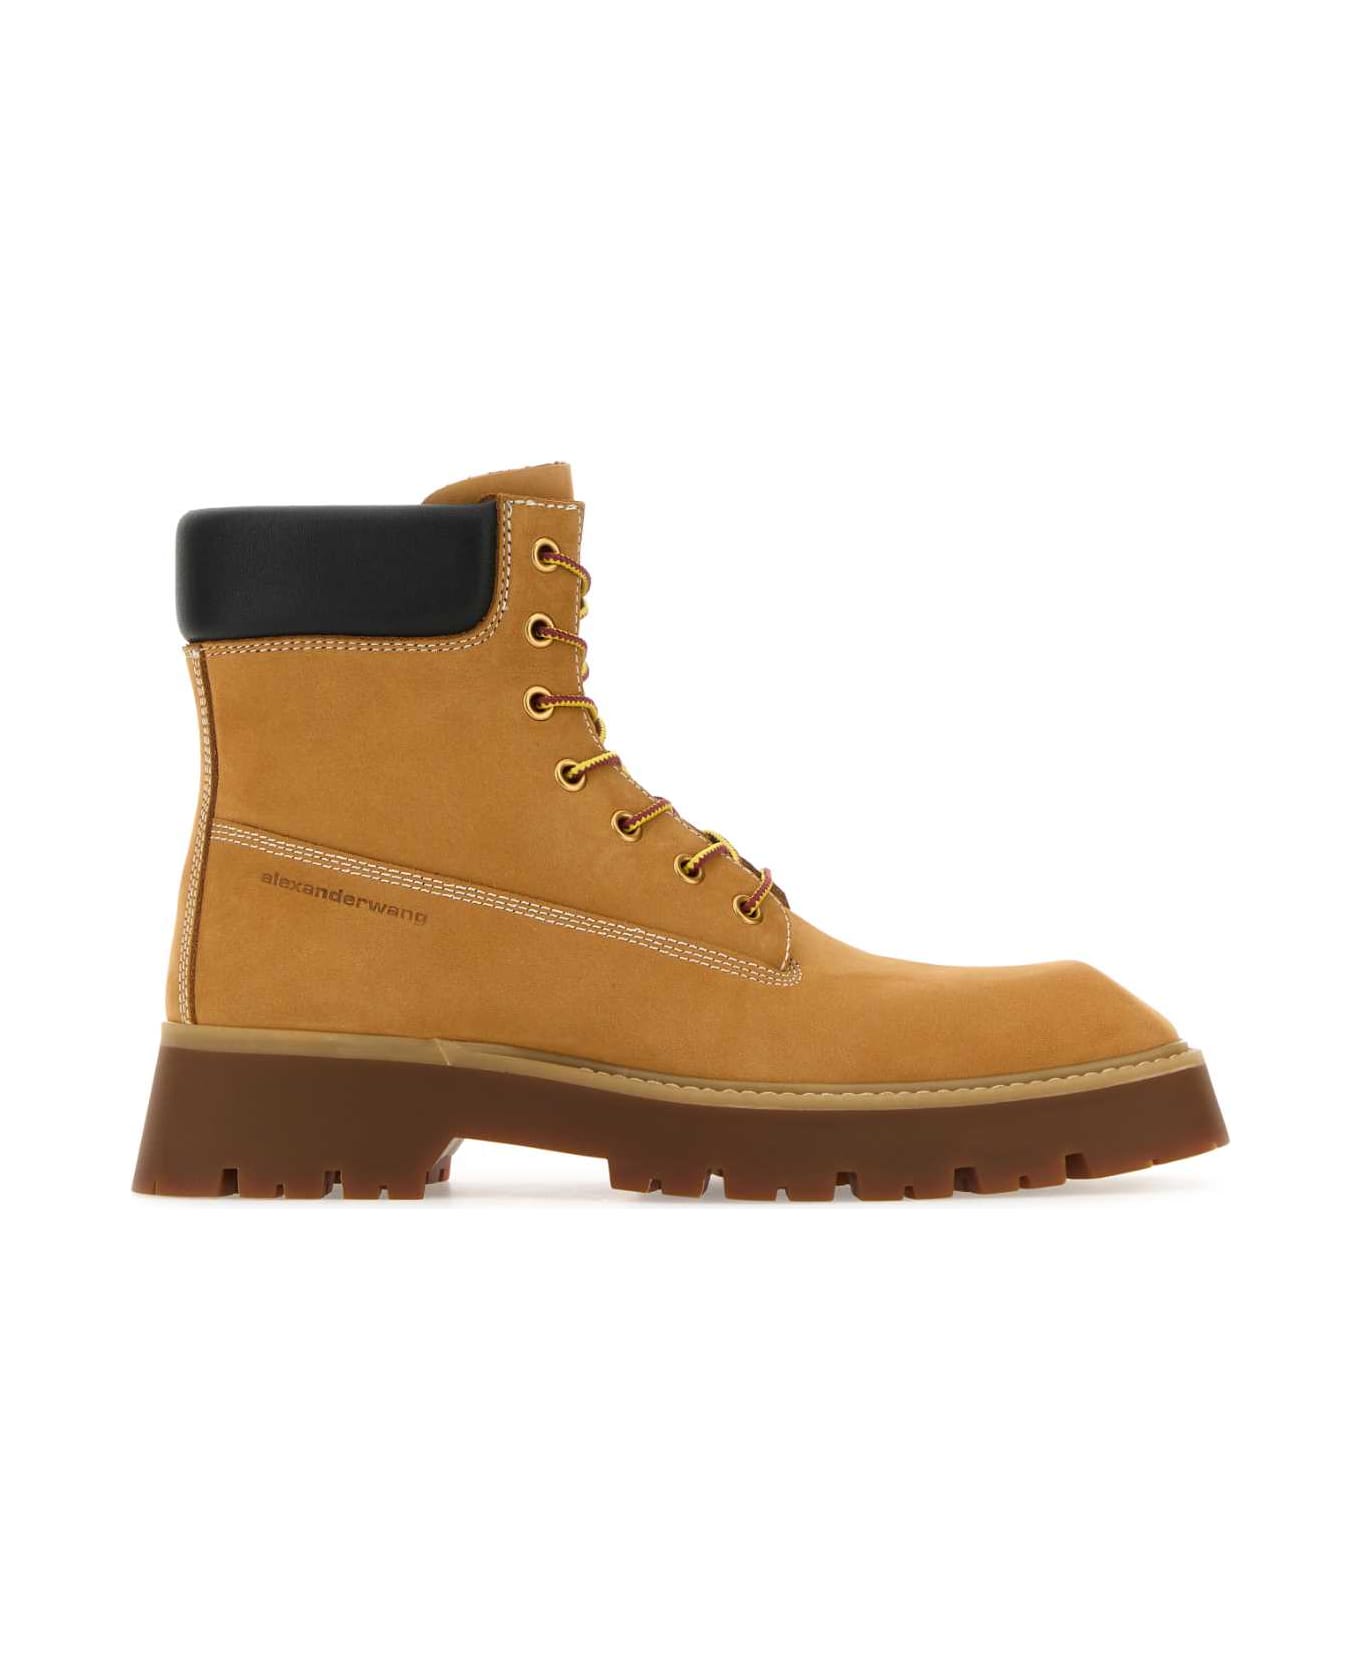 Alexander Wang Camel Suede Throttle Ankle Boots - WHEAT